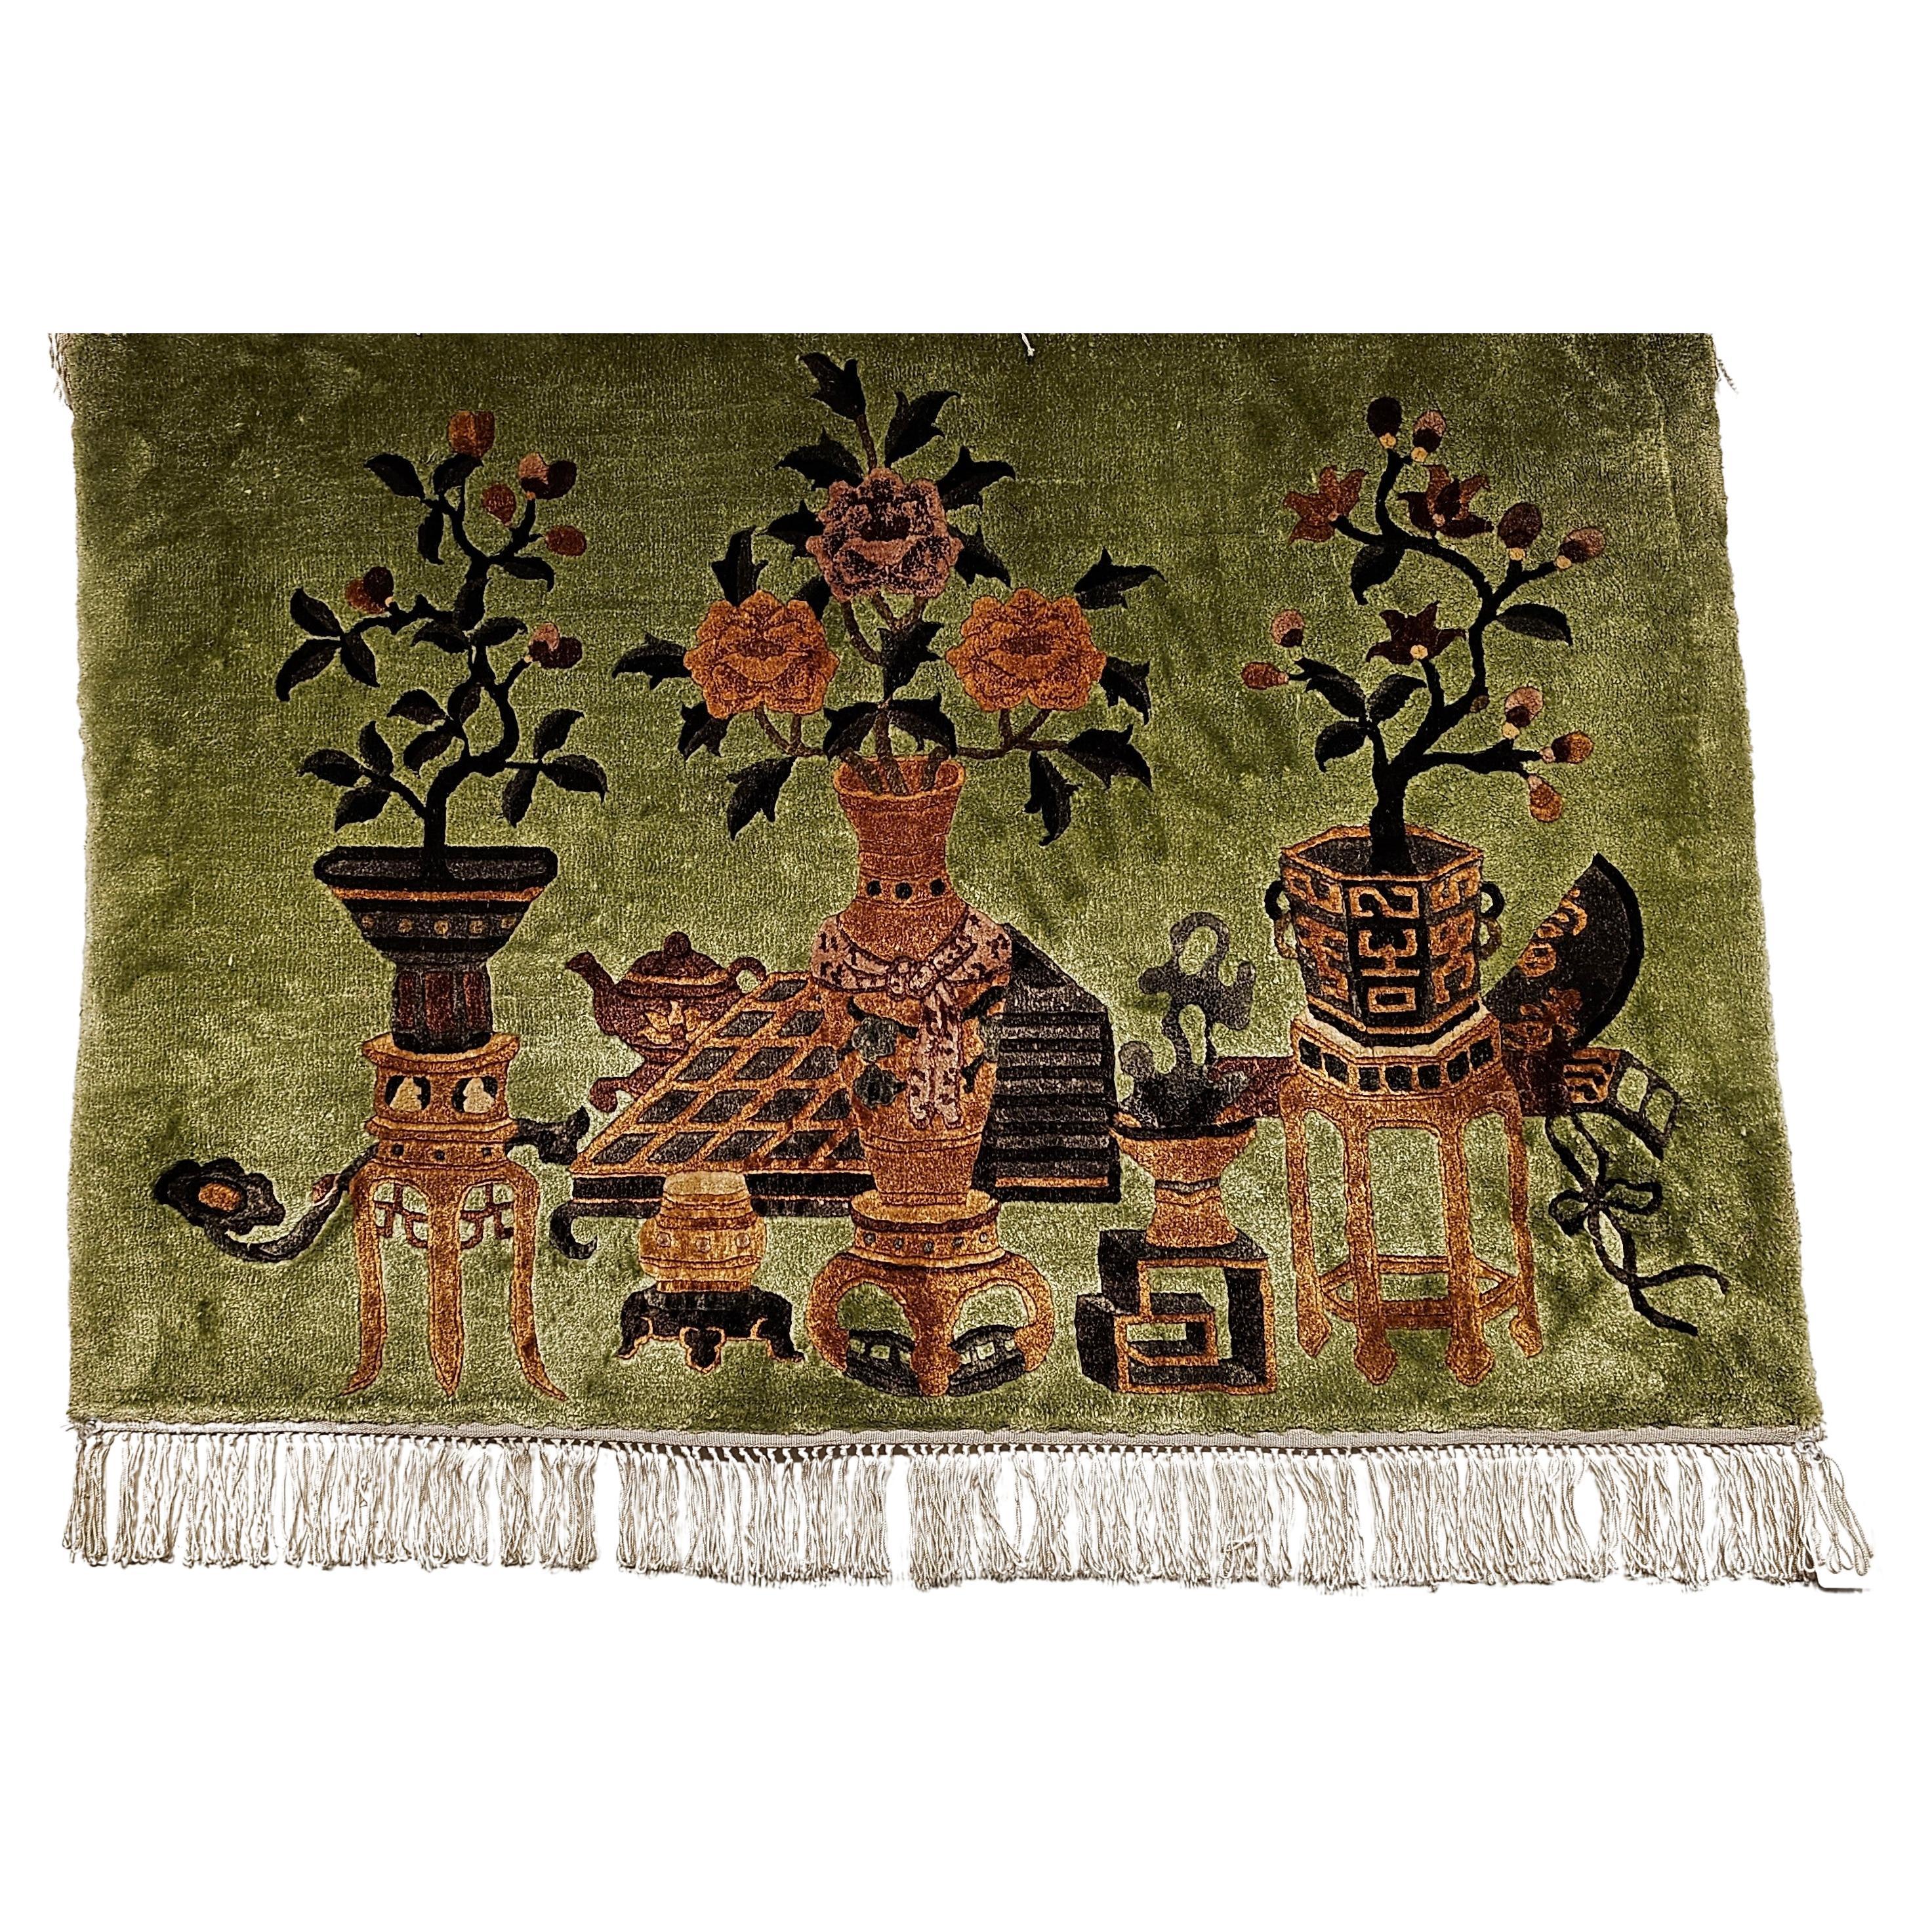  A pair of Chinese Art Deco partial silk pictorial rugs in classic vase pattern from the mid 1900s.  The rugs have a wool pile on a silk foundation.  The background is in a beautiful pale green color with designs of tree flower vases in brown, pale